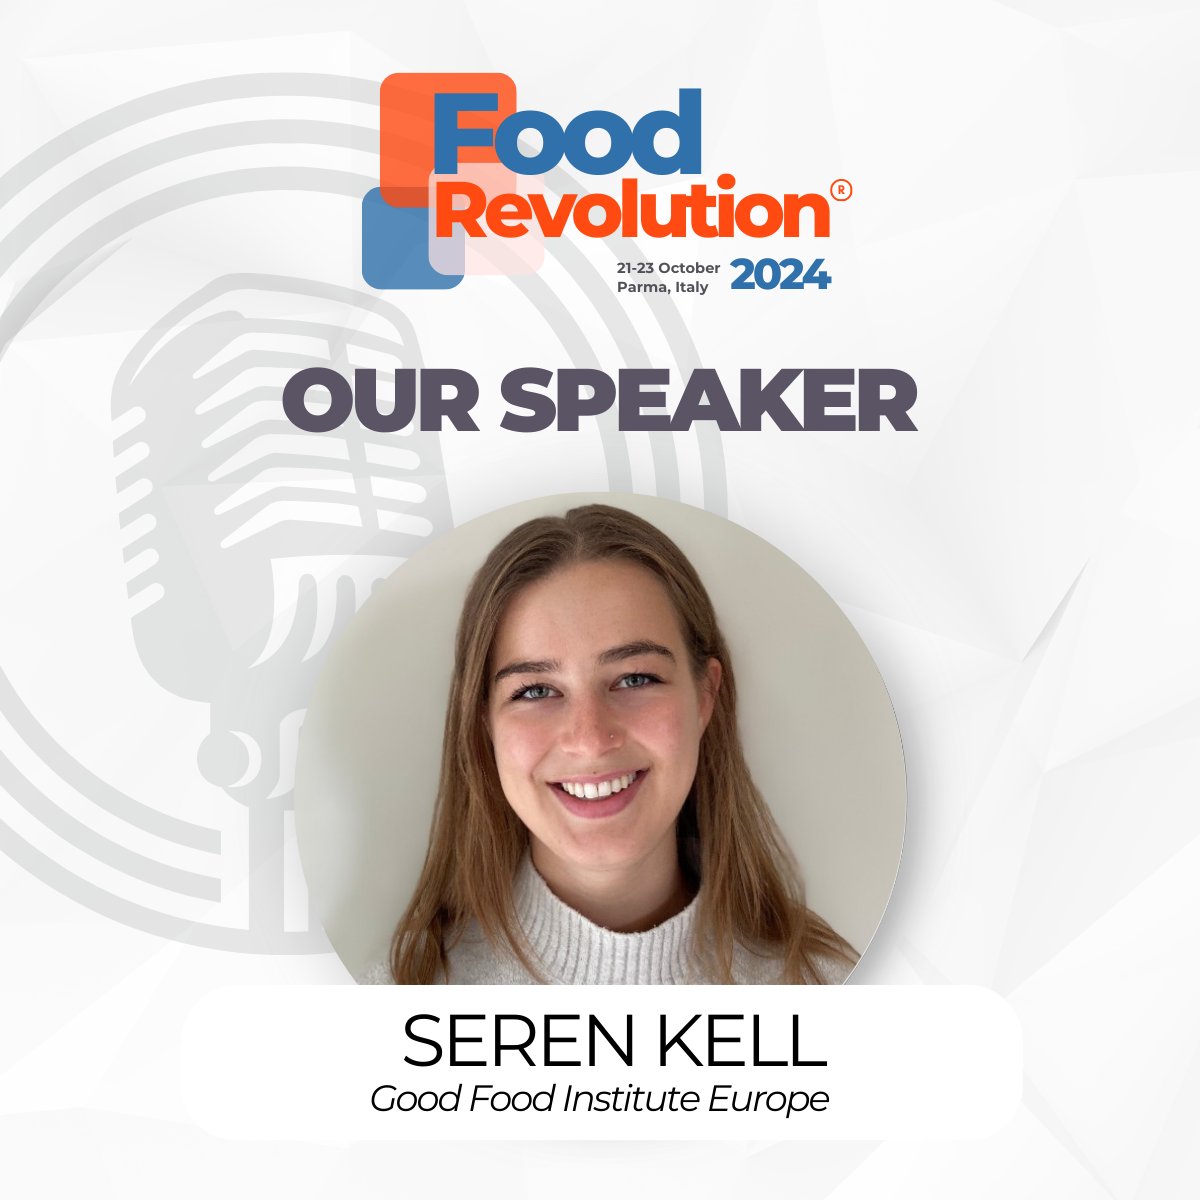 We are thrilled to announce a new addition to our esteemed lineup of speakers for FoodRevolution2024: Dr. Seren Kell from @GoodFoodInst Europe! 🎙️

Seren will captivate our audience with her talk on #precisionfermentation for #alternativeproteins.